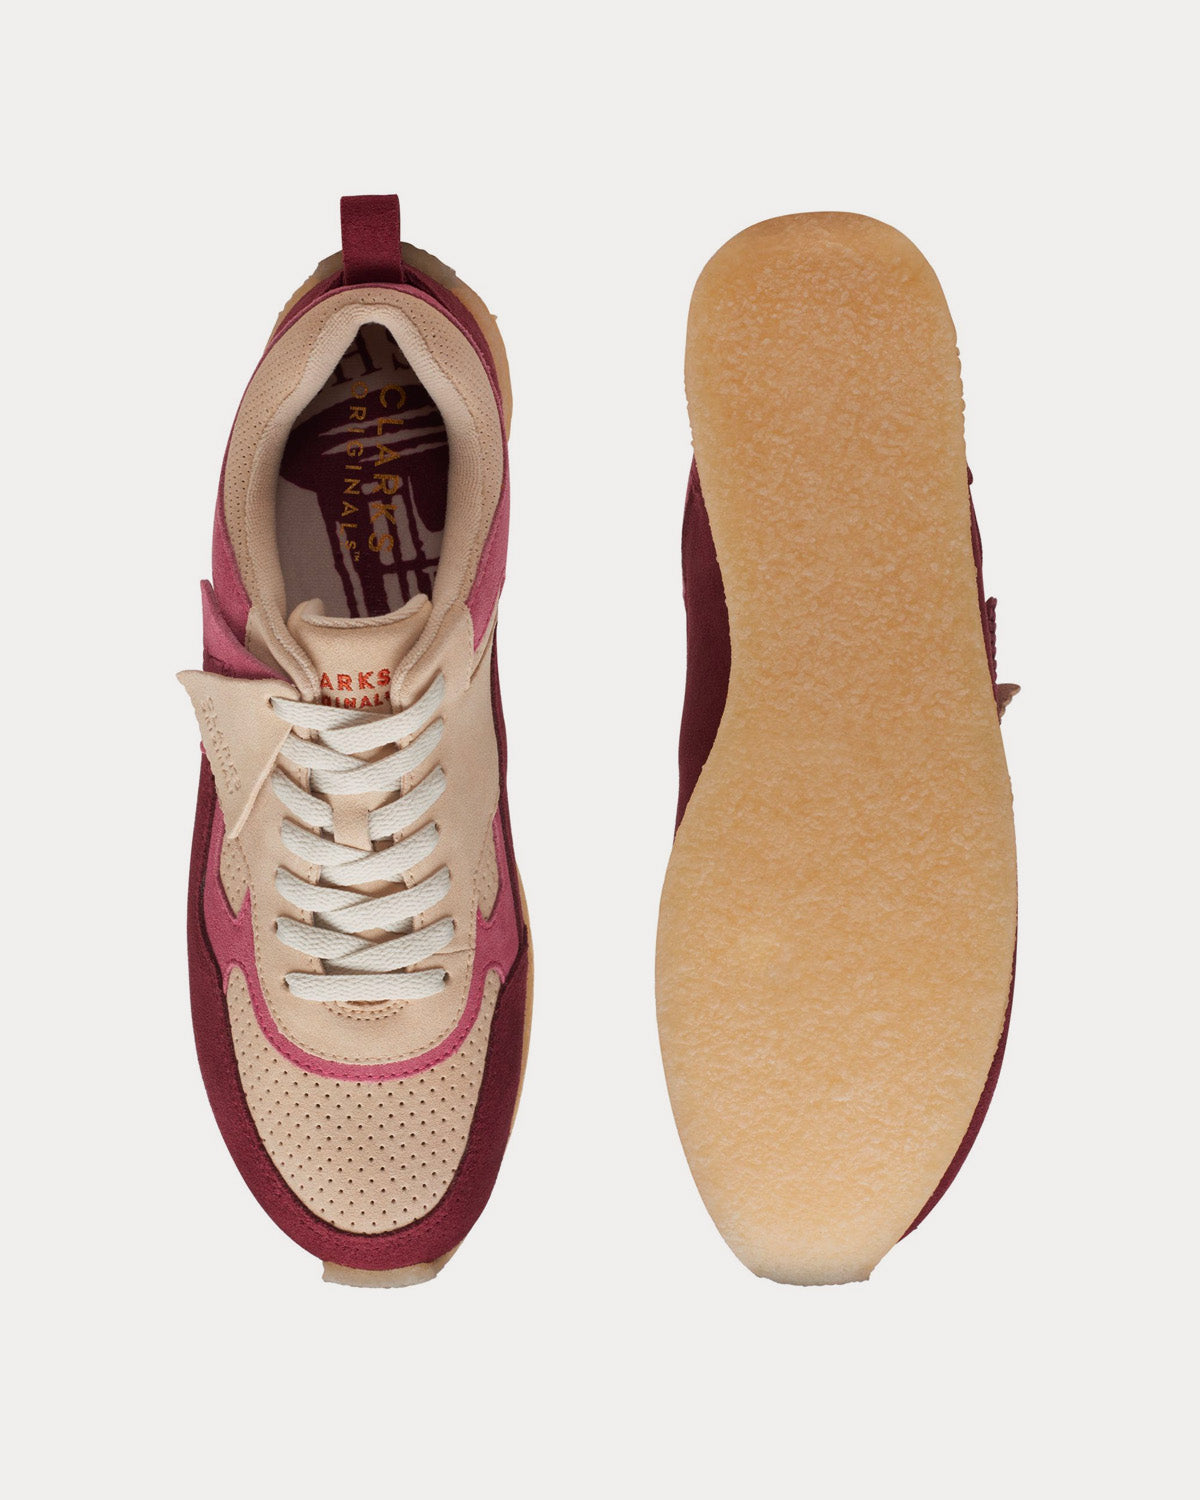 Clarks x Kith - Lockhill Oxblood Combi Low Top Sneakers